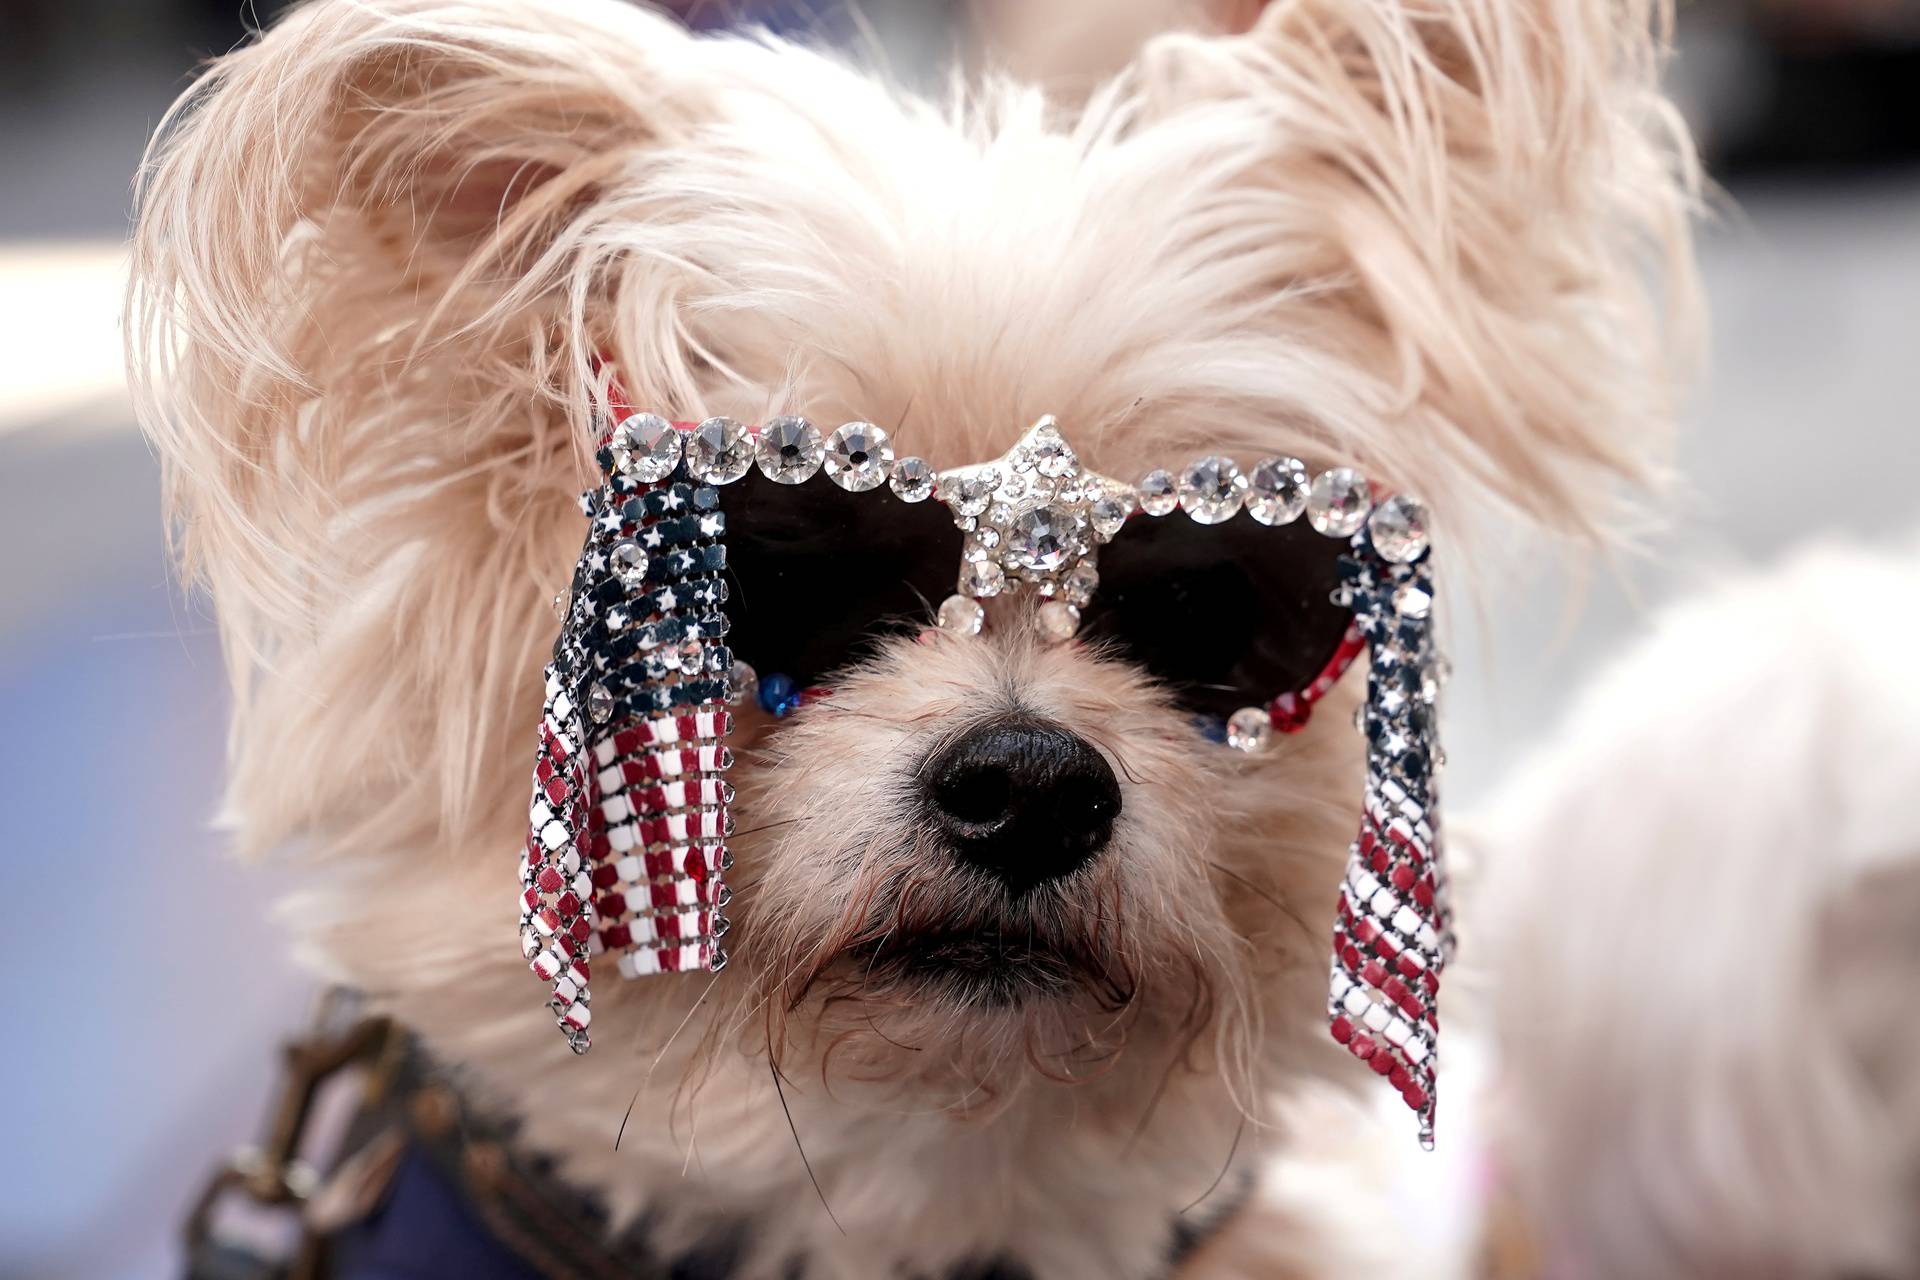 People pose their dog for pictures as they await the decision in the U.S. election in Times Square